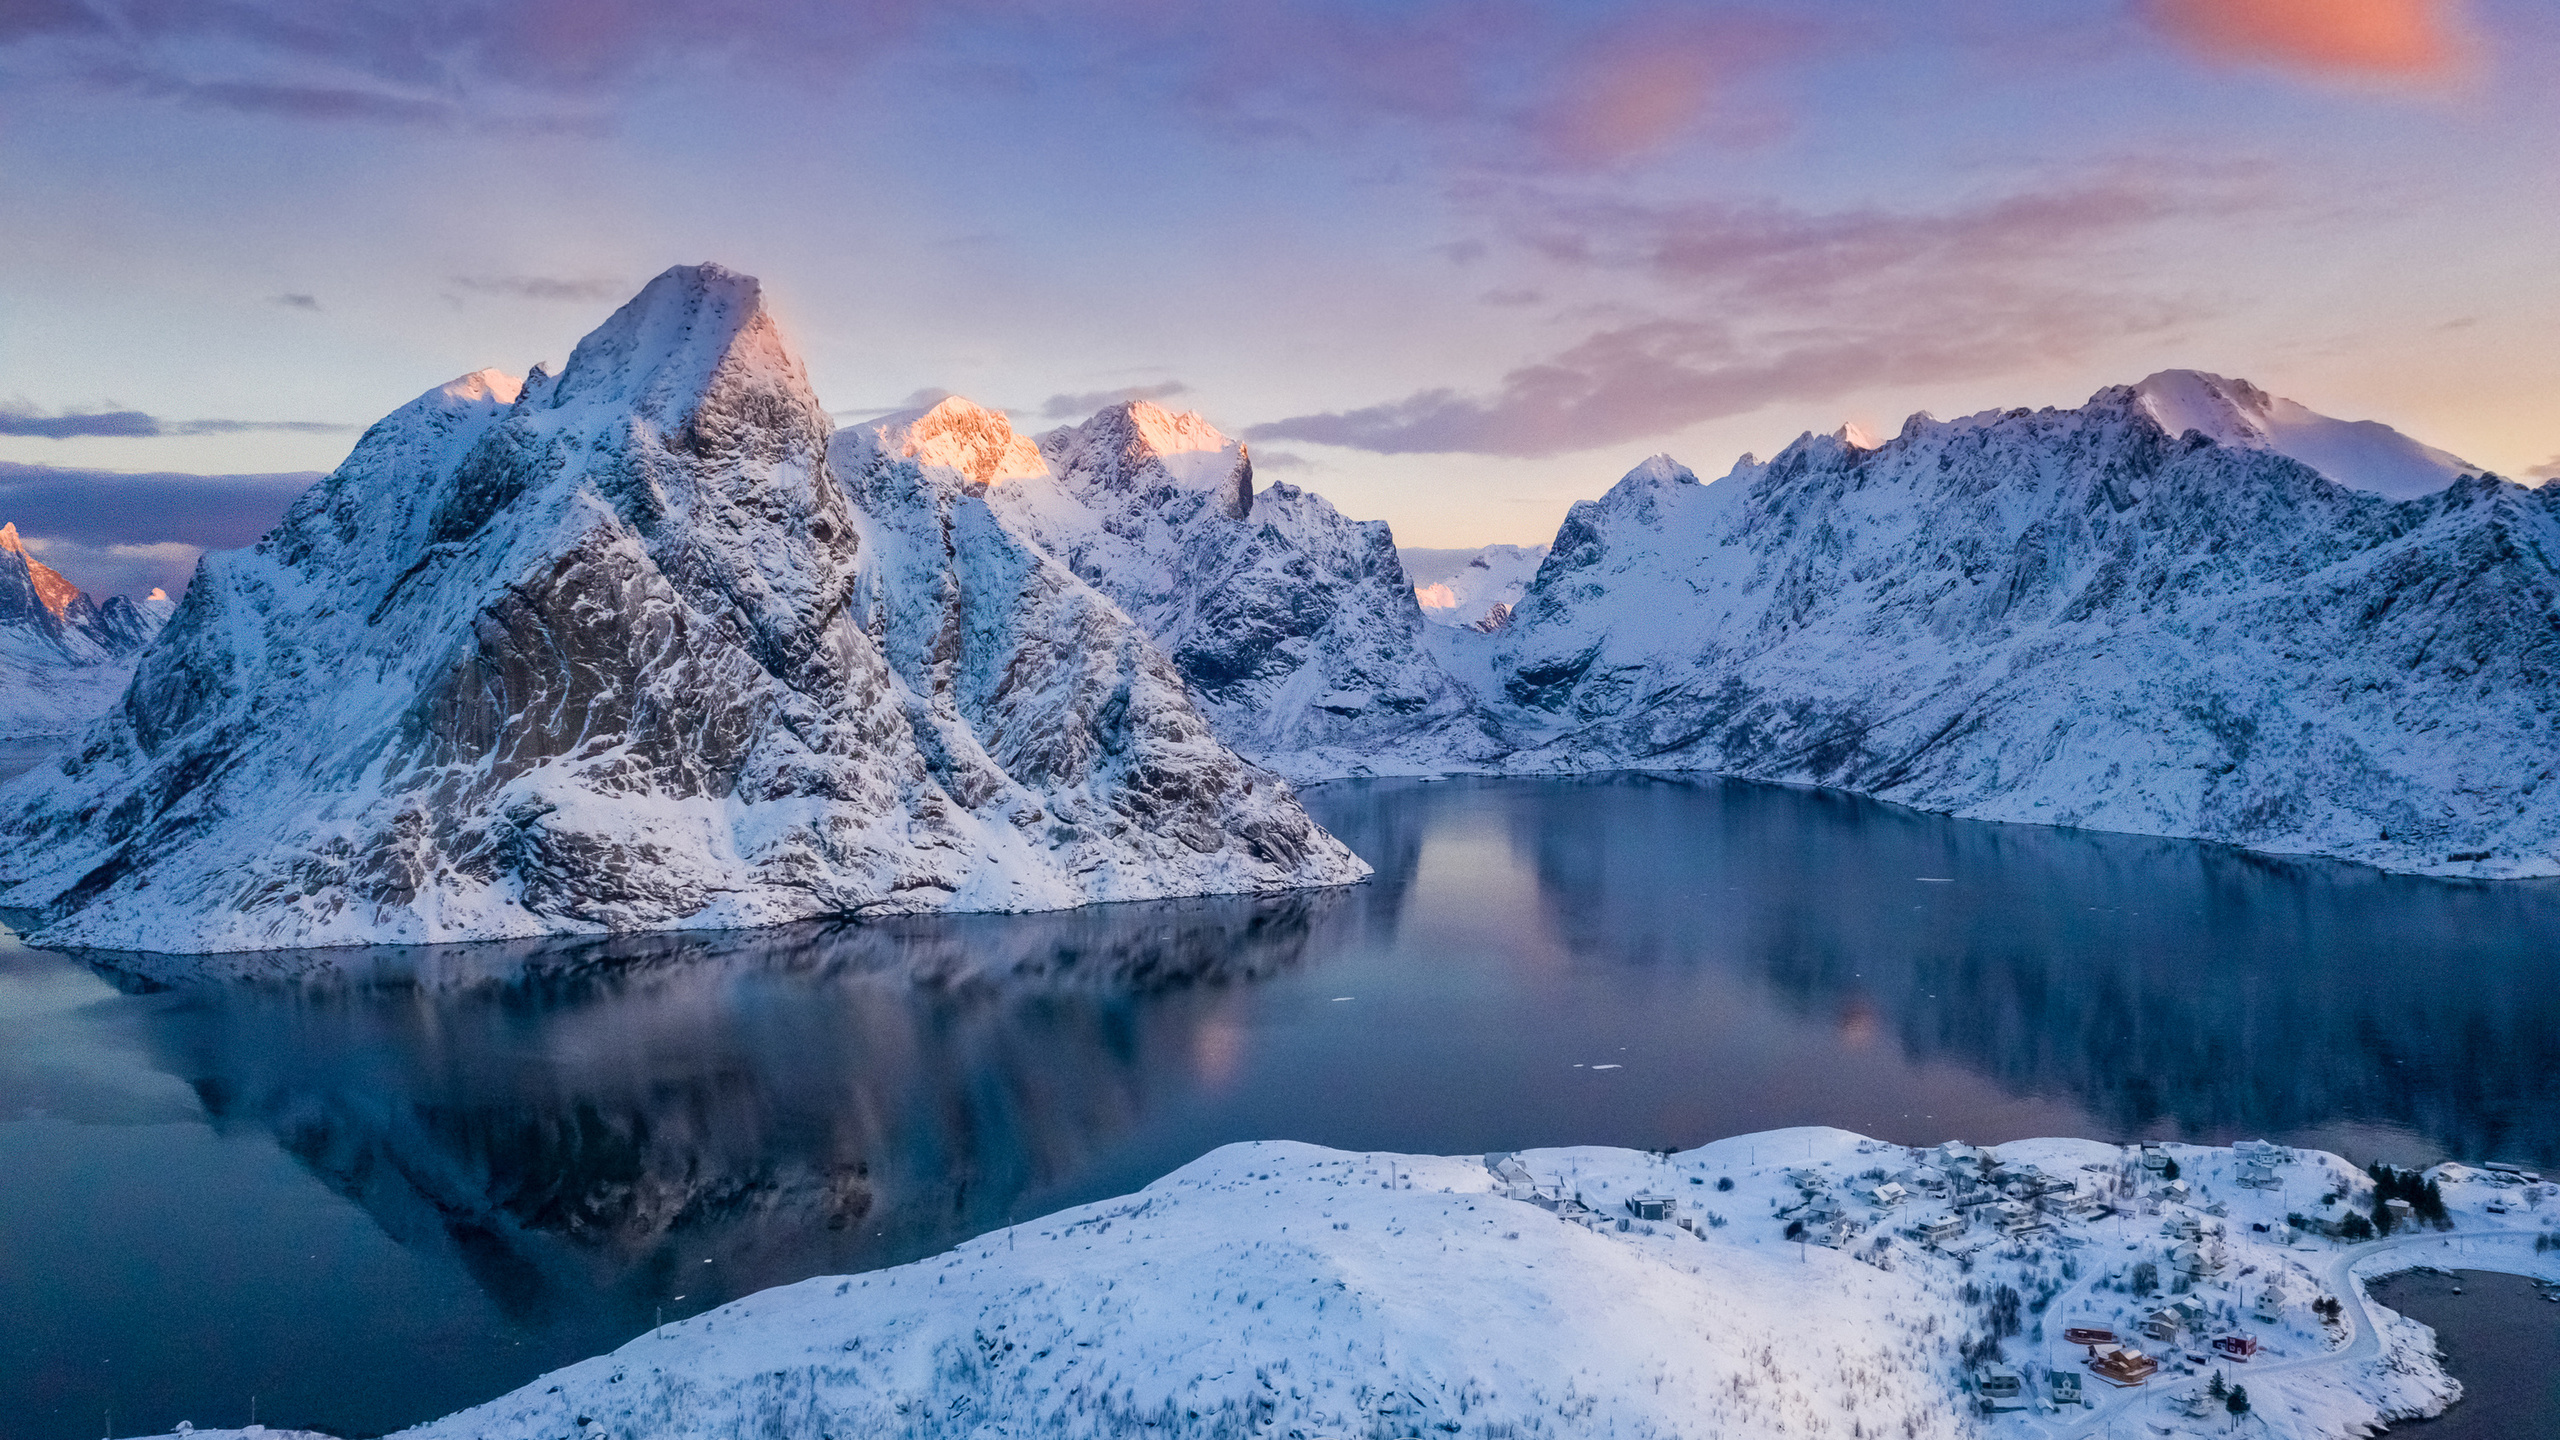 Norway Lofoten Mountains Winter Bay Snow 1440P Resolution HD 4k Wallpaper, Image, Background, Photo and Picture